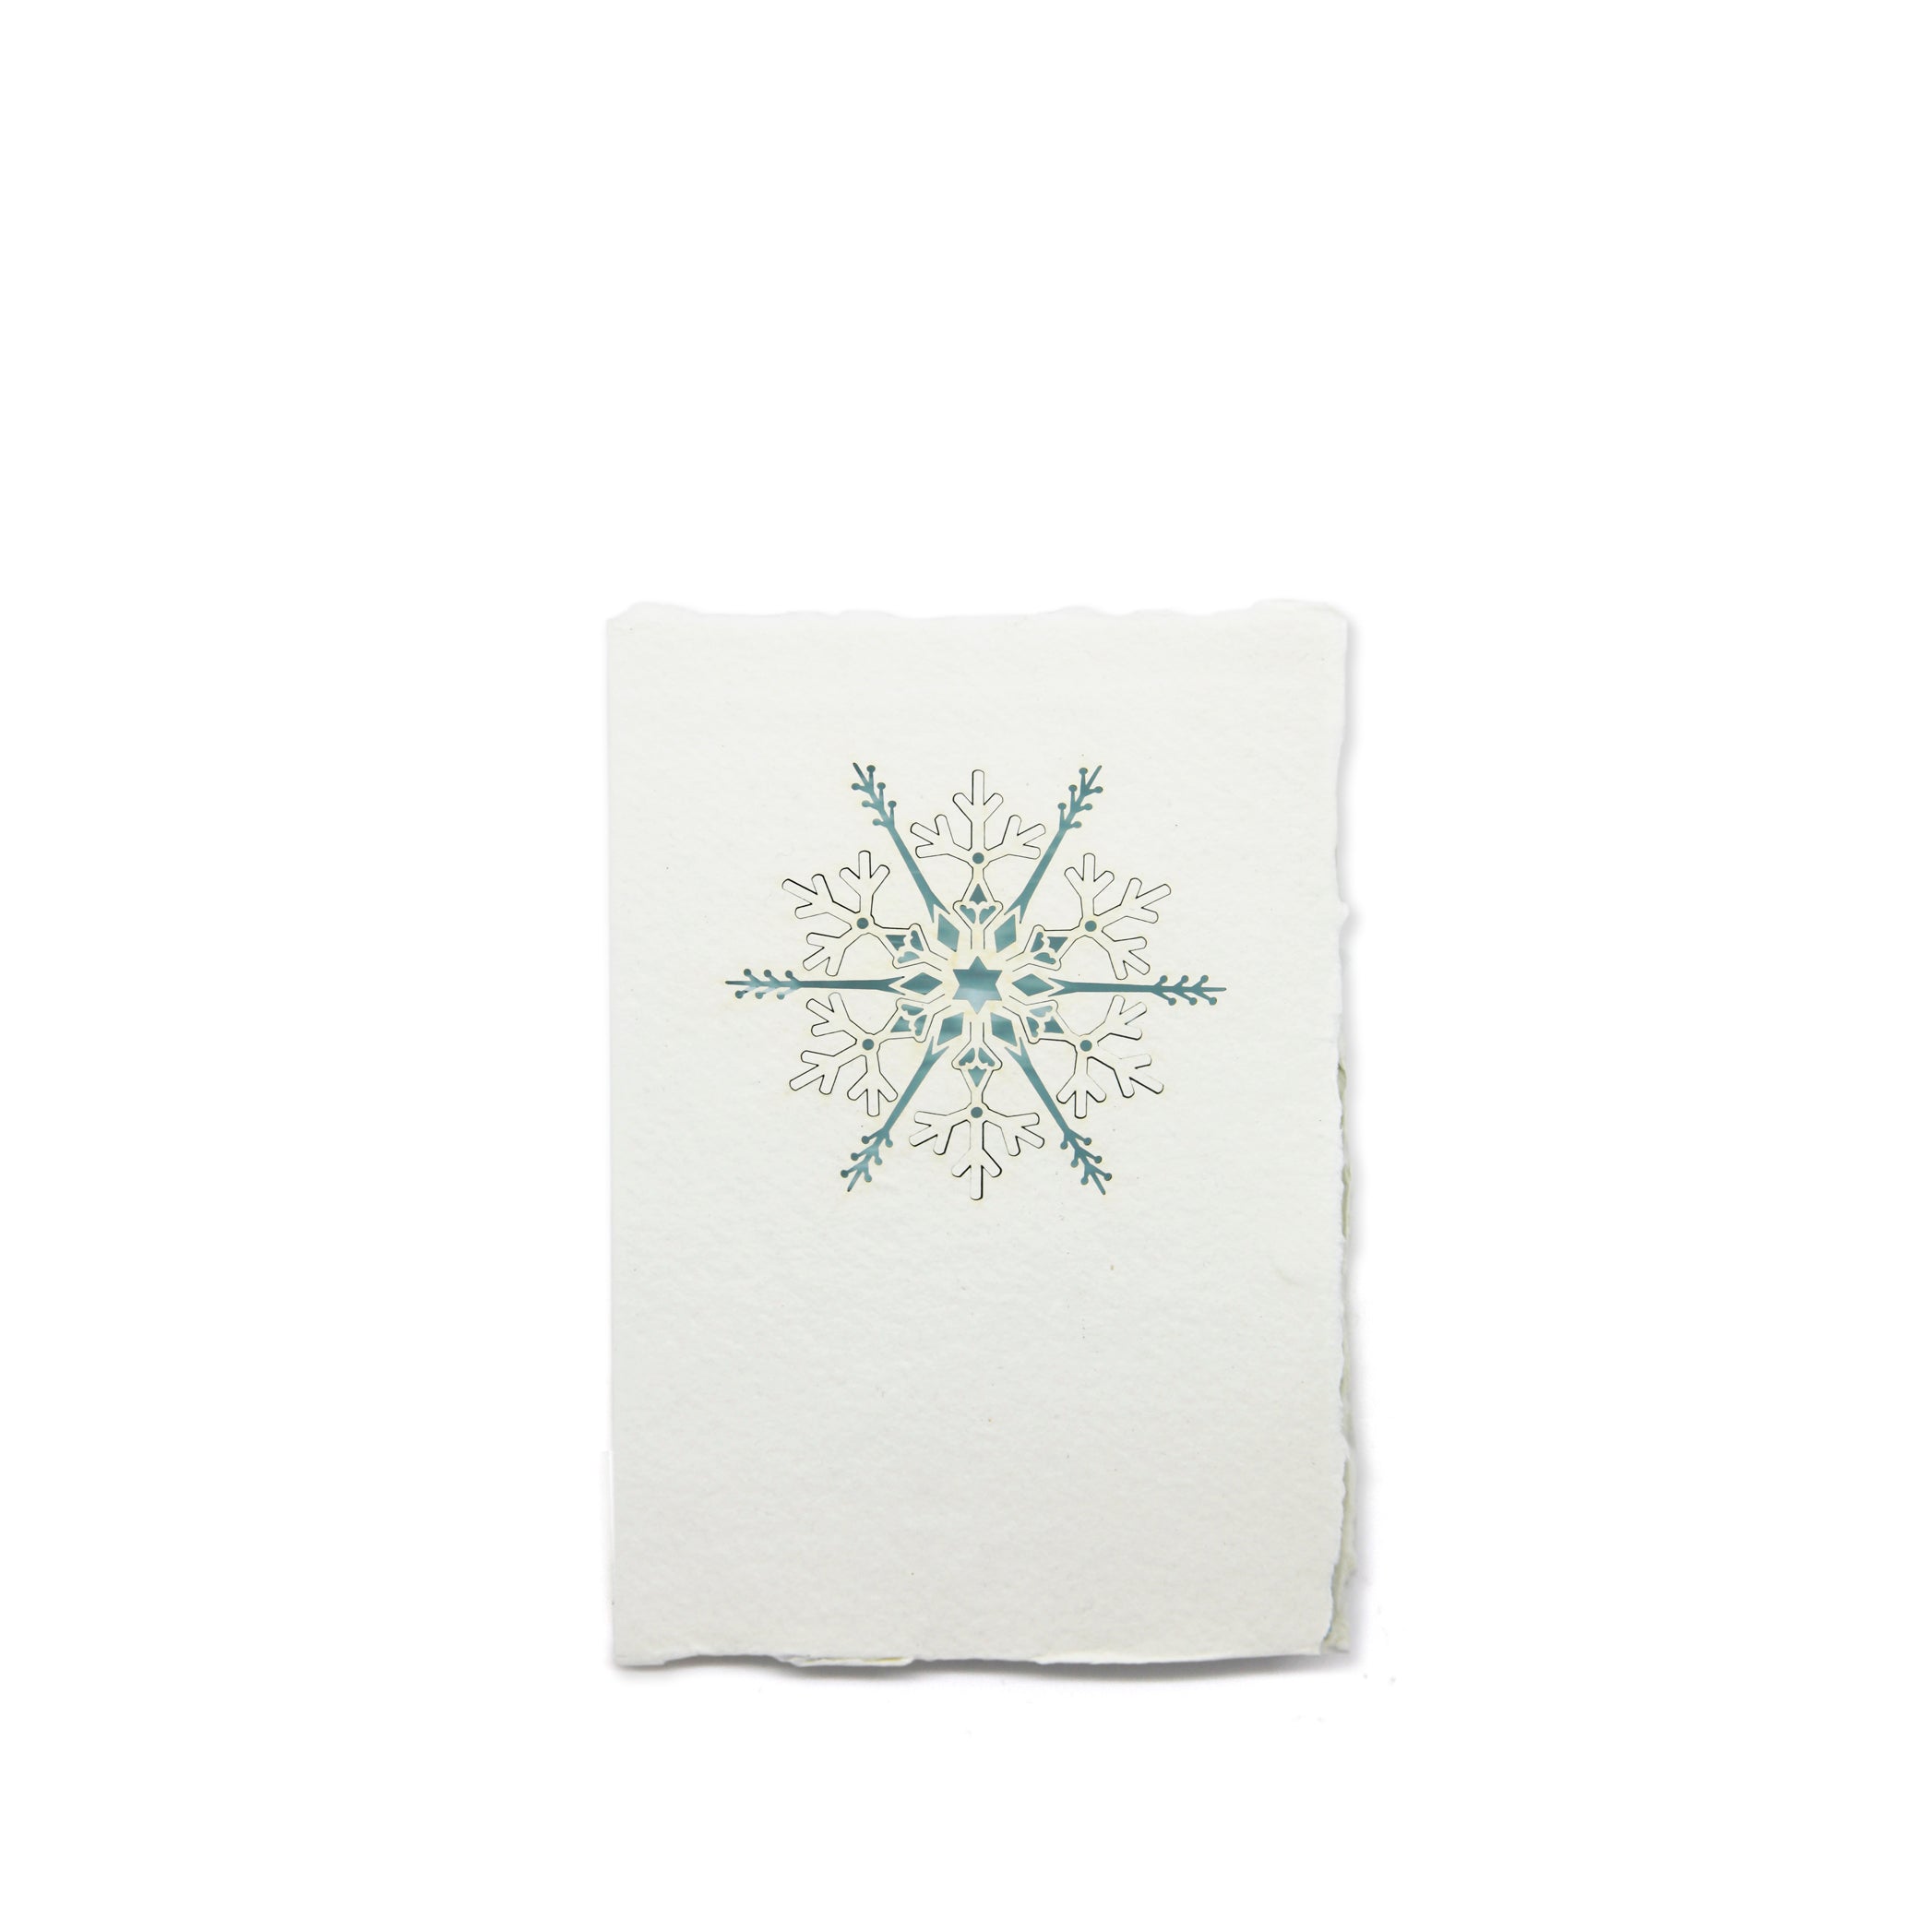 Handmade Paper Greeting Card with Snowflake, 15cm x 10cm